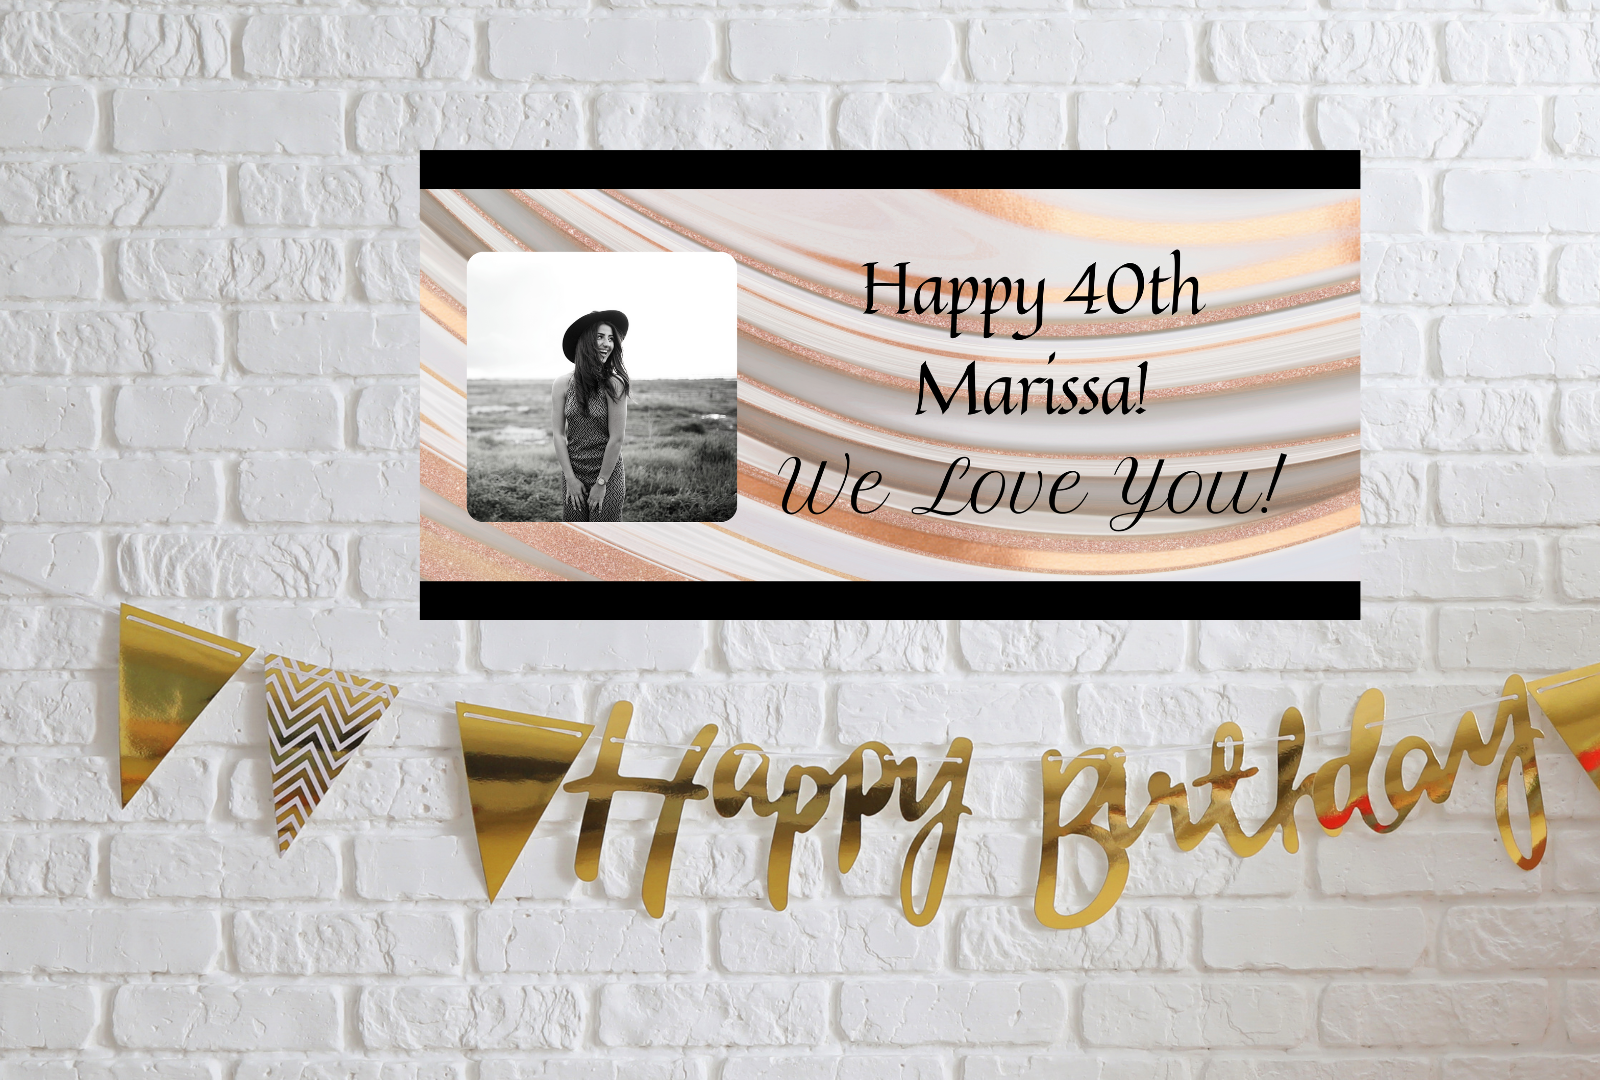 Make your party come alive with our custom photo banners!  Want to make your event extra special? Our customizable photo banners are the way to do it.  Whether you're having a birthday party or anniversary party, we've got what you need. Just upload your favorite photos, tell us where you want them to go on the banner and voila—instant magic! Plus, our banners are waterproof, so they'll stay looking beautiful even after hours of fun in the sun.  So what are you waiting for? Get shopping today!